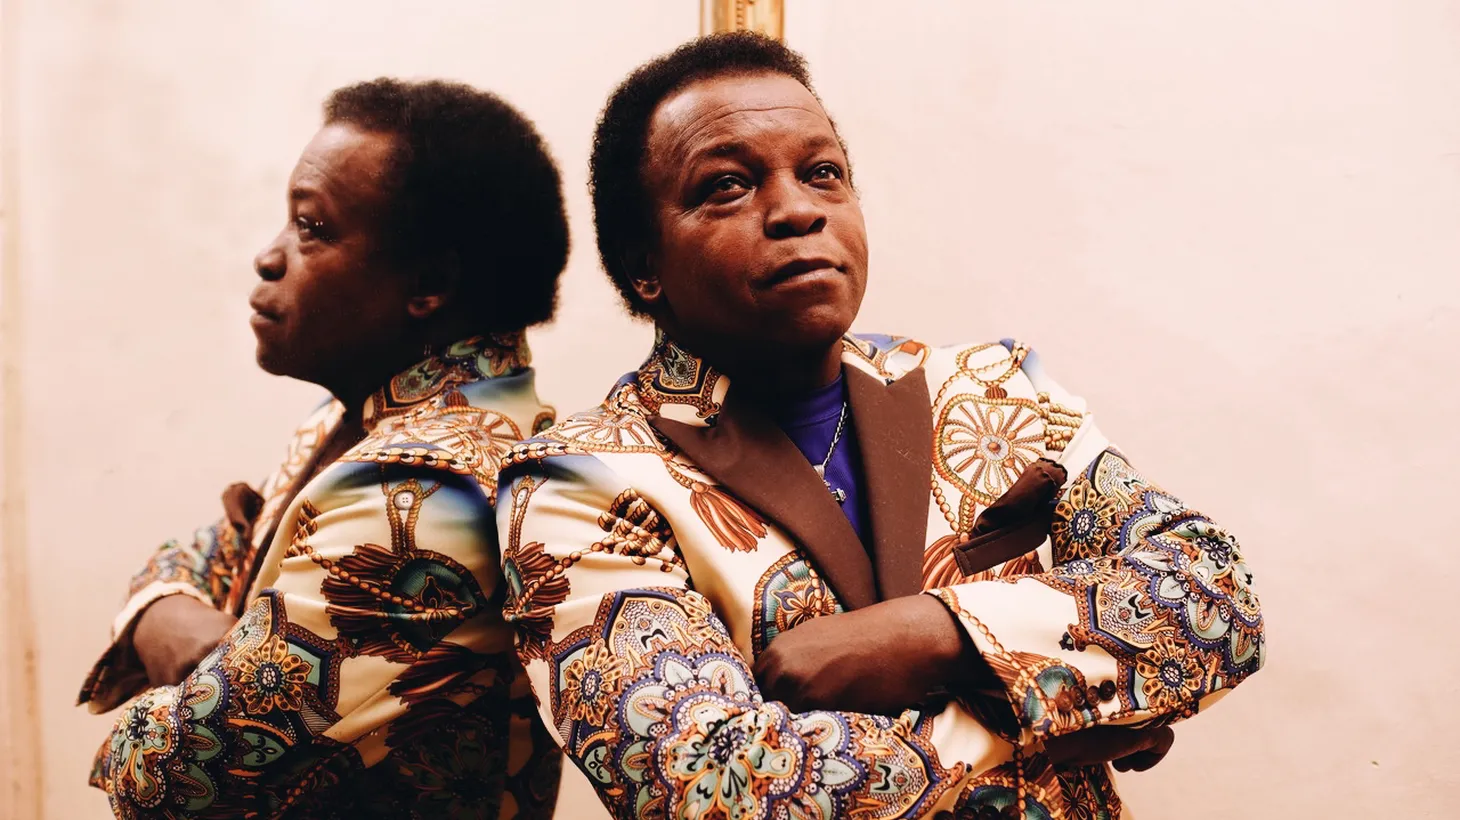 Lee Fields has worked with Kool & The Gang, B.B. King and Bobby Womack to name a few. He recorded his first single in 1969 and now makes music with The Expressions.